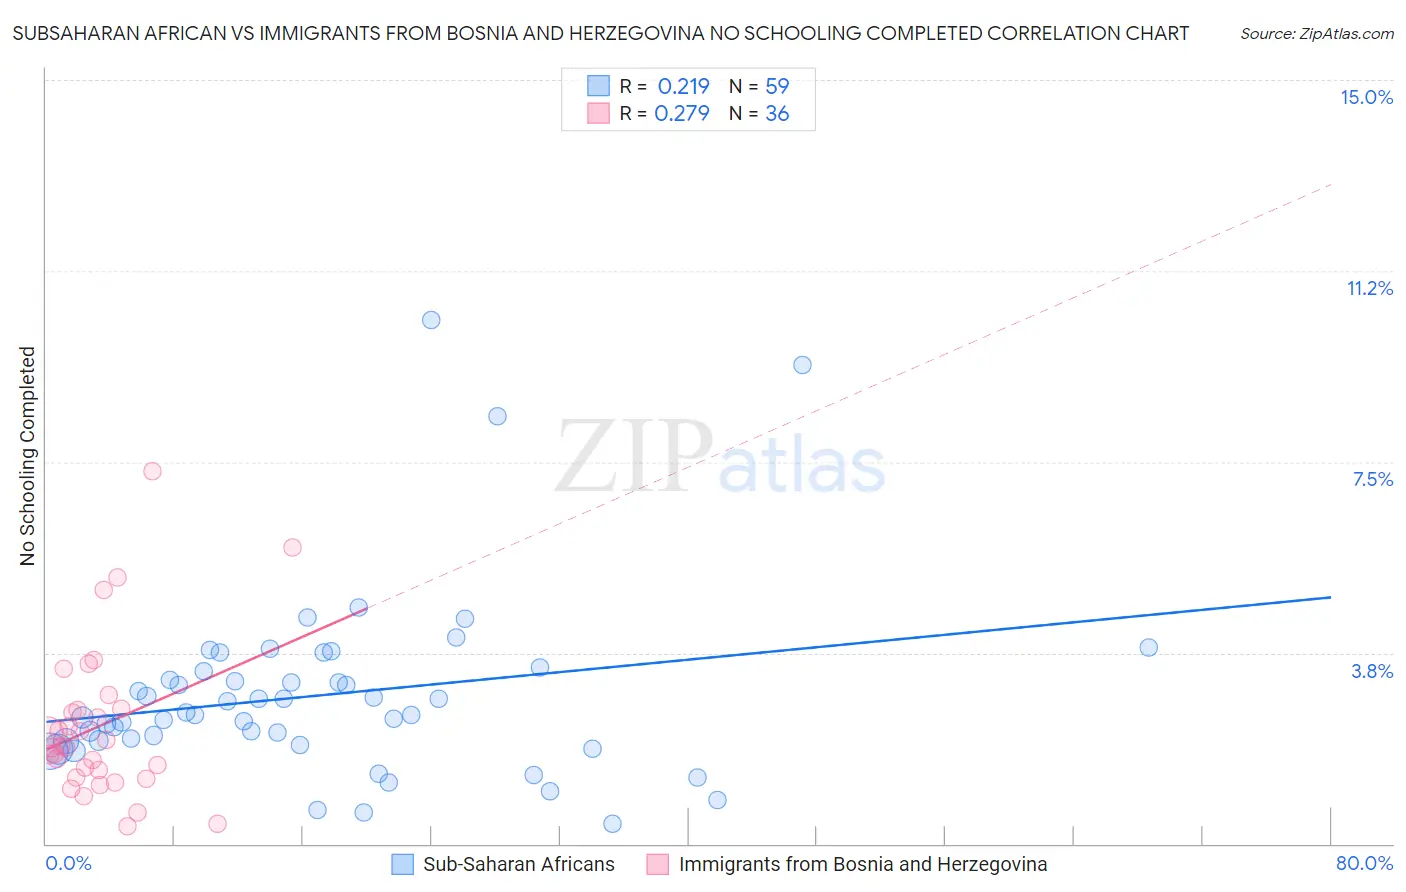 Subsaharan African vs Immigrants from Bosnia and Herzegovina No Schooling Completed